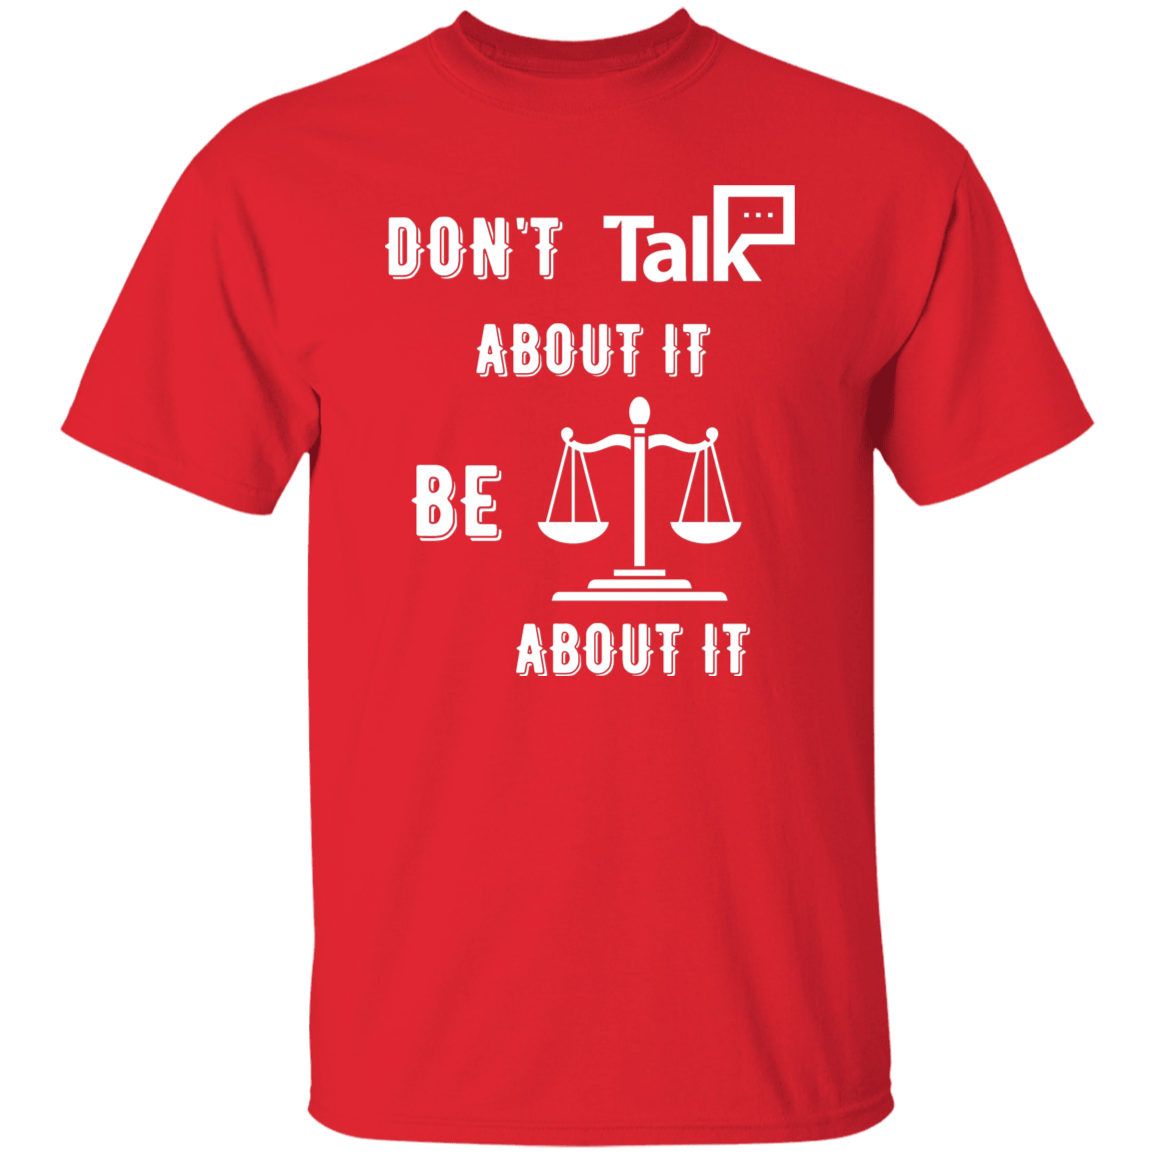 Don't Talk About It - Justice Short Sleeve Shirt